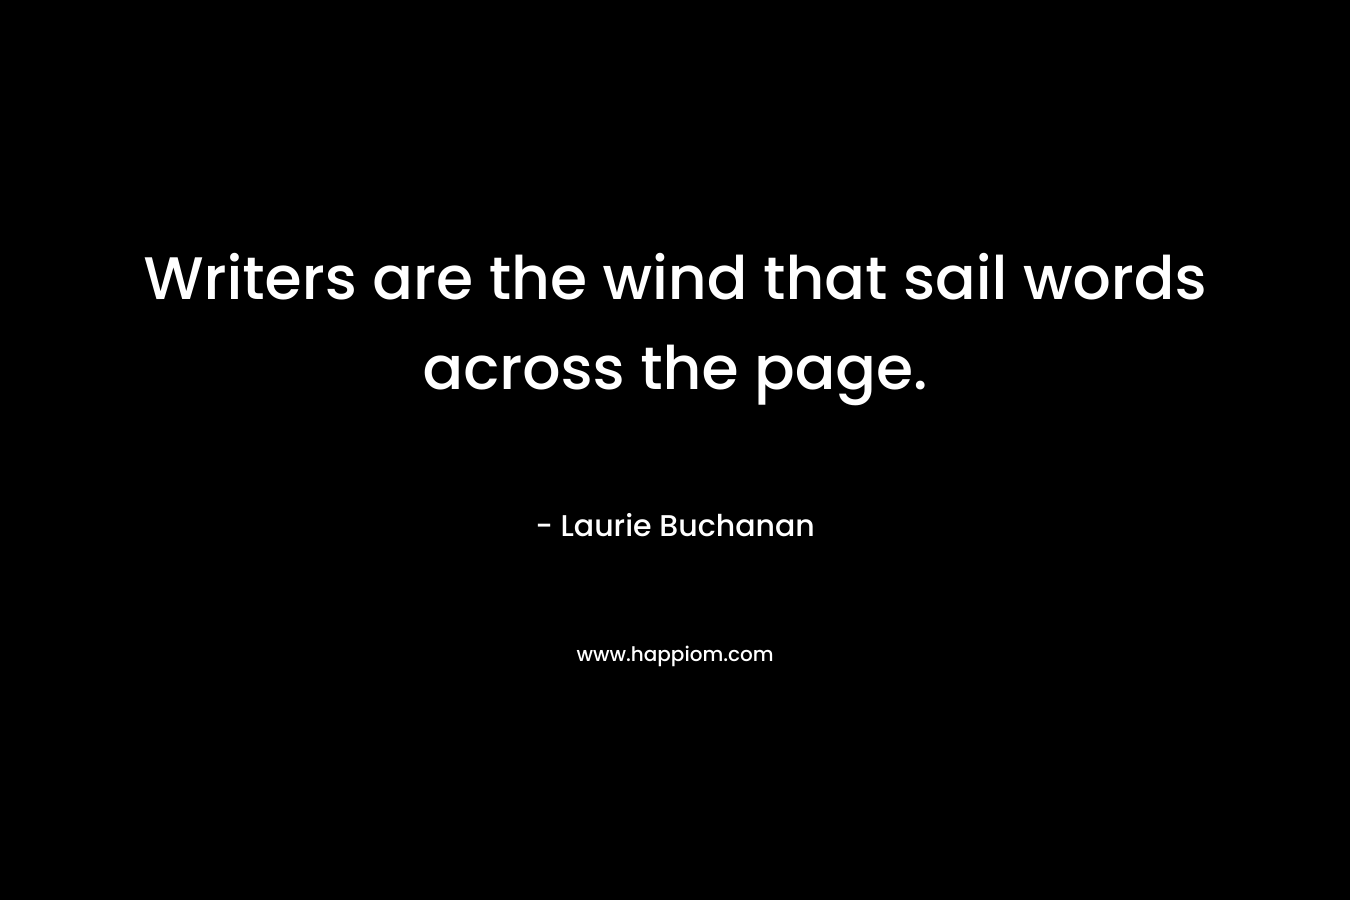 Writers are the wind that sail words across the page.